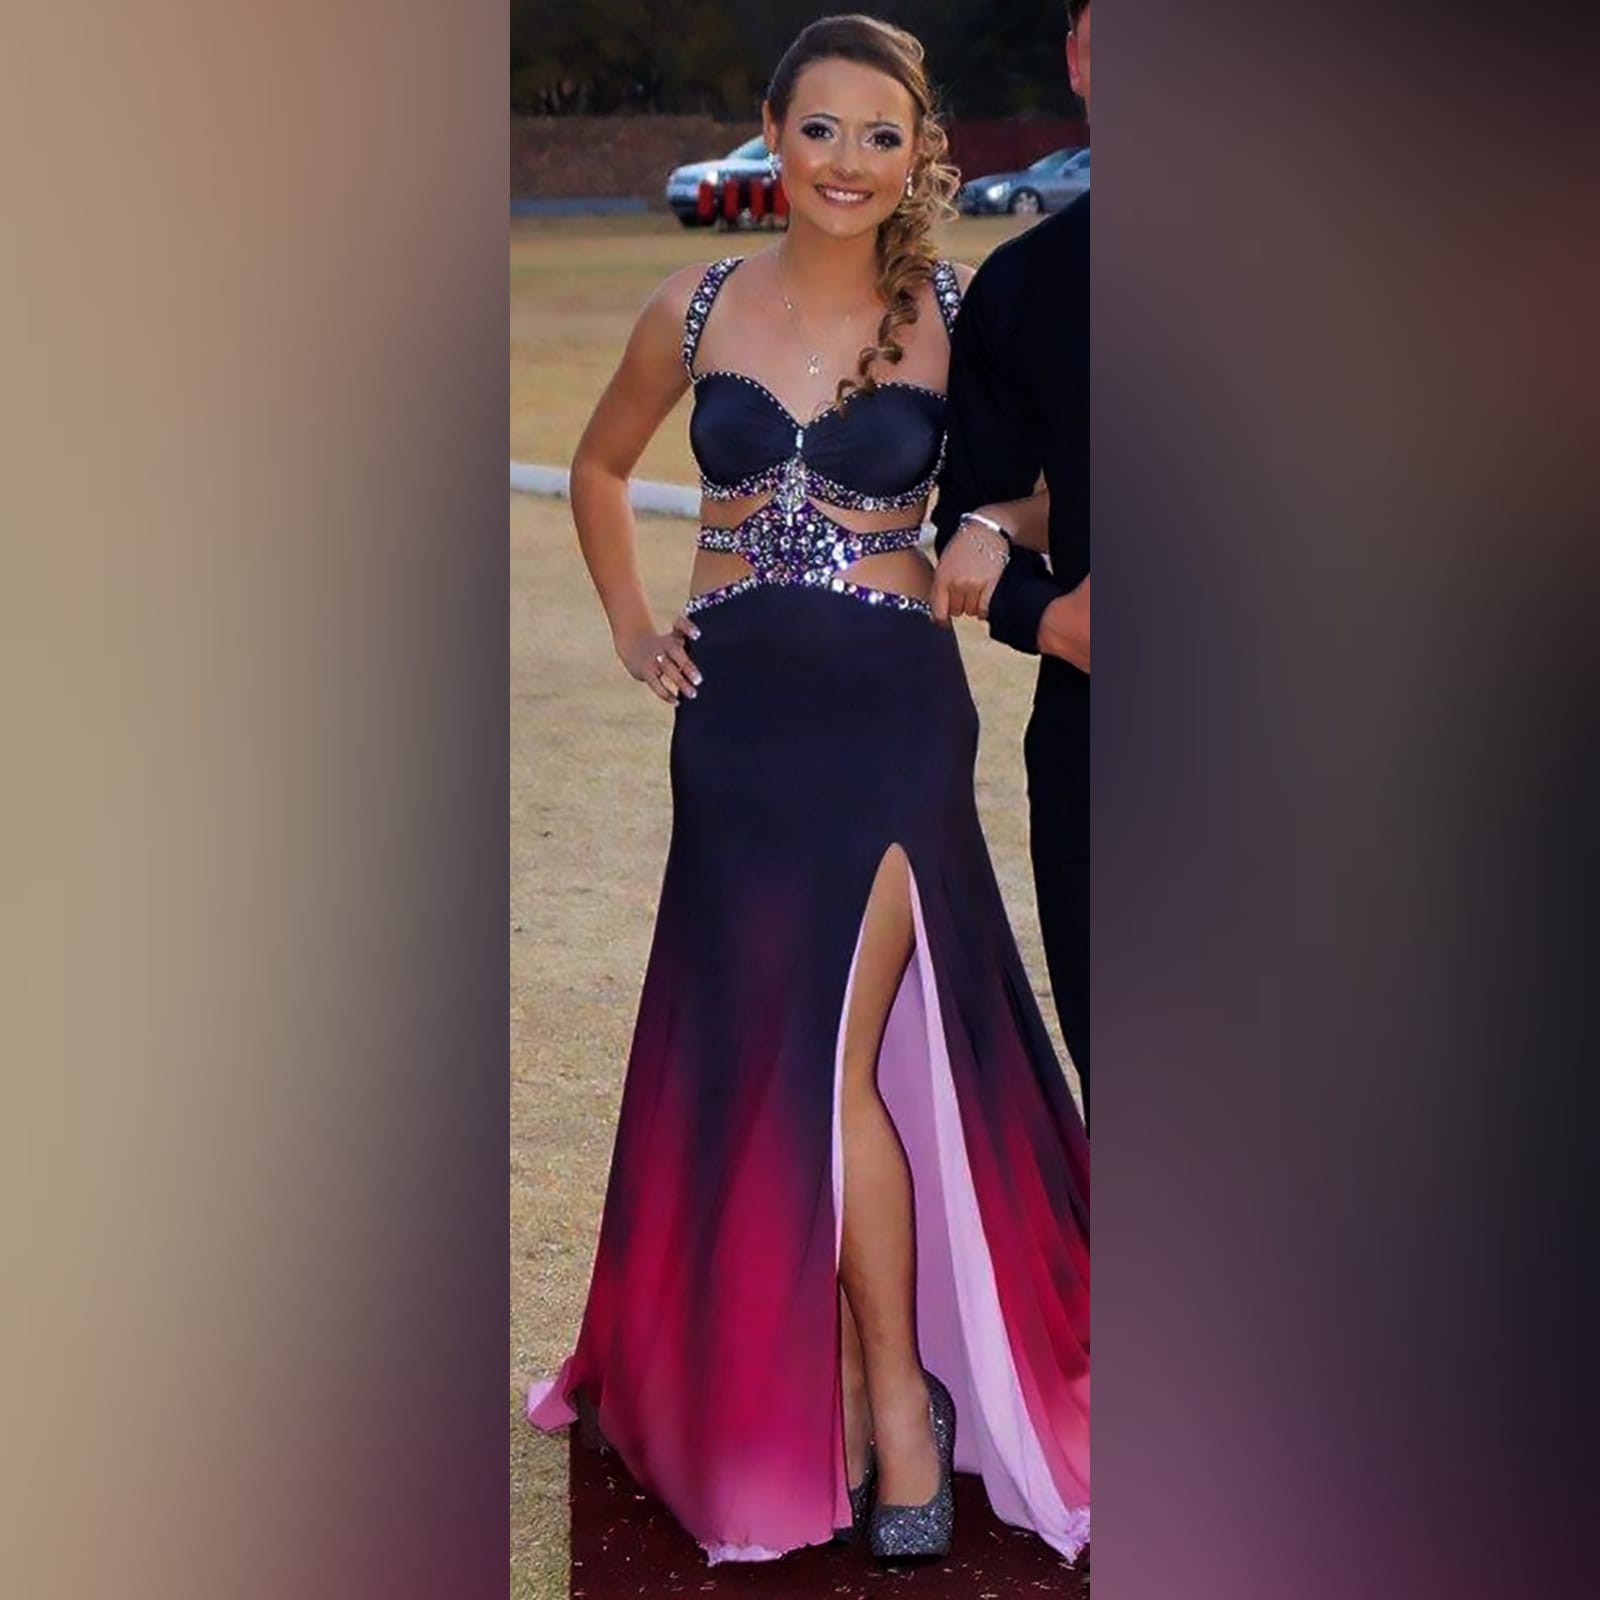 Black pink ombre sexy matric dance dress 9 black and pink ombre sexy matric dance dress. With a slit and a train. With tummy and back openings detailed with silver and pink beads.